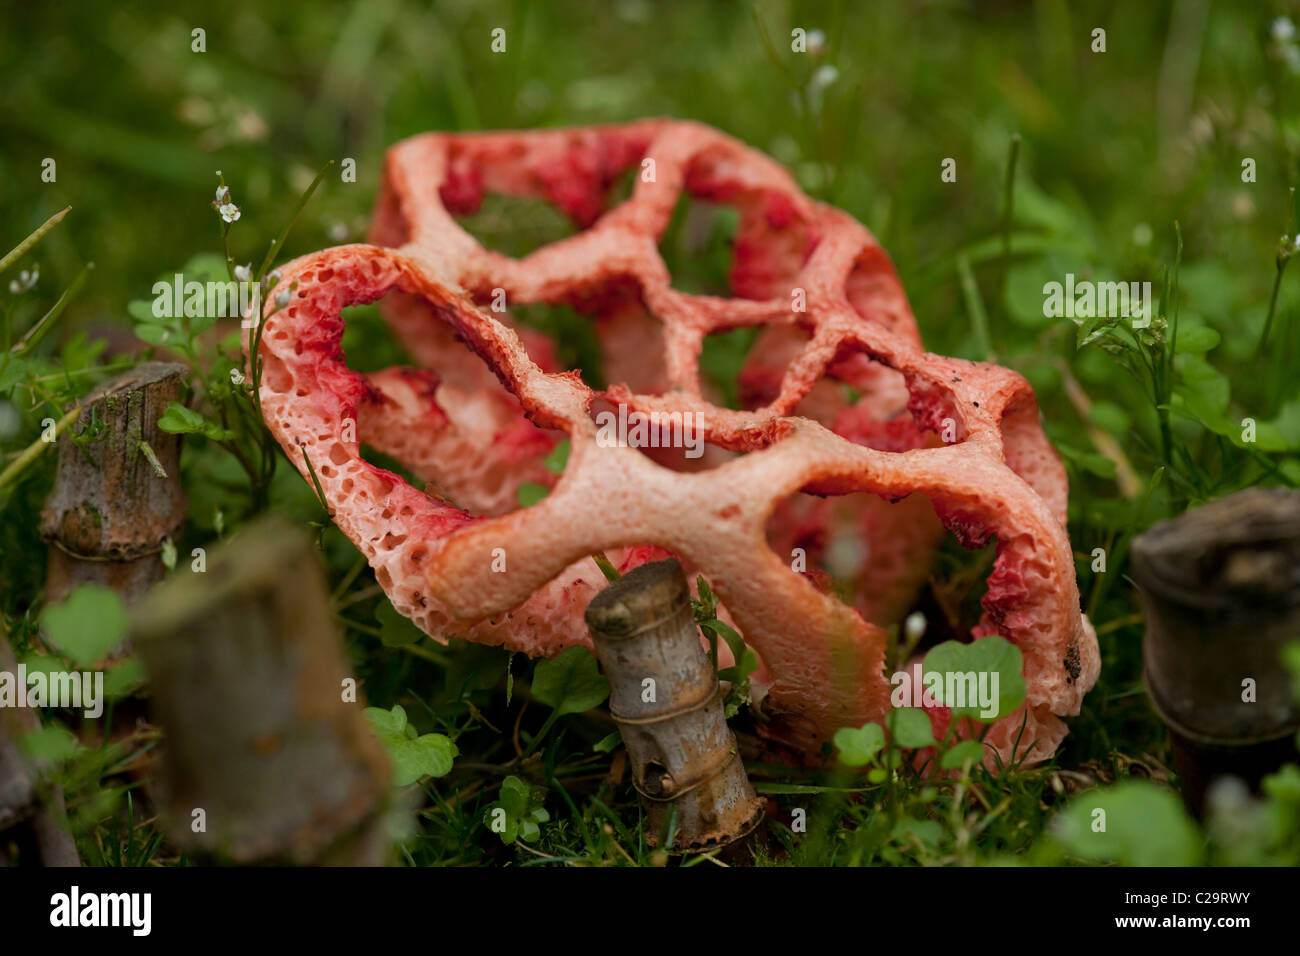 Latticed, or Basket, Stinkhorn Fungus (Clathrus ruber). Sometimes also called 'Red Cage'. Stock Photo